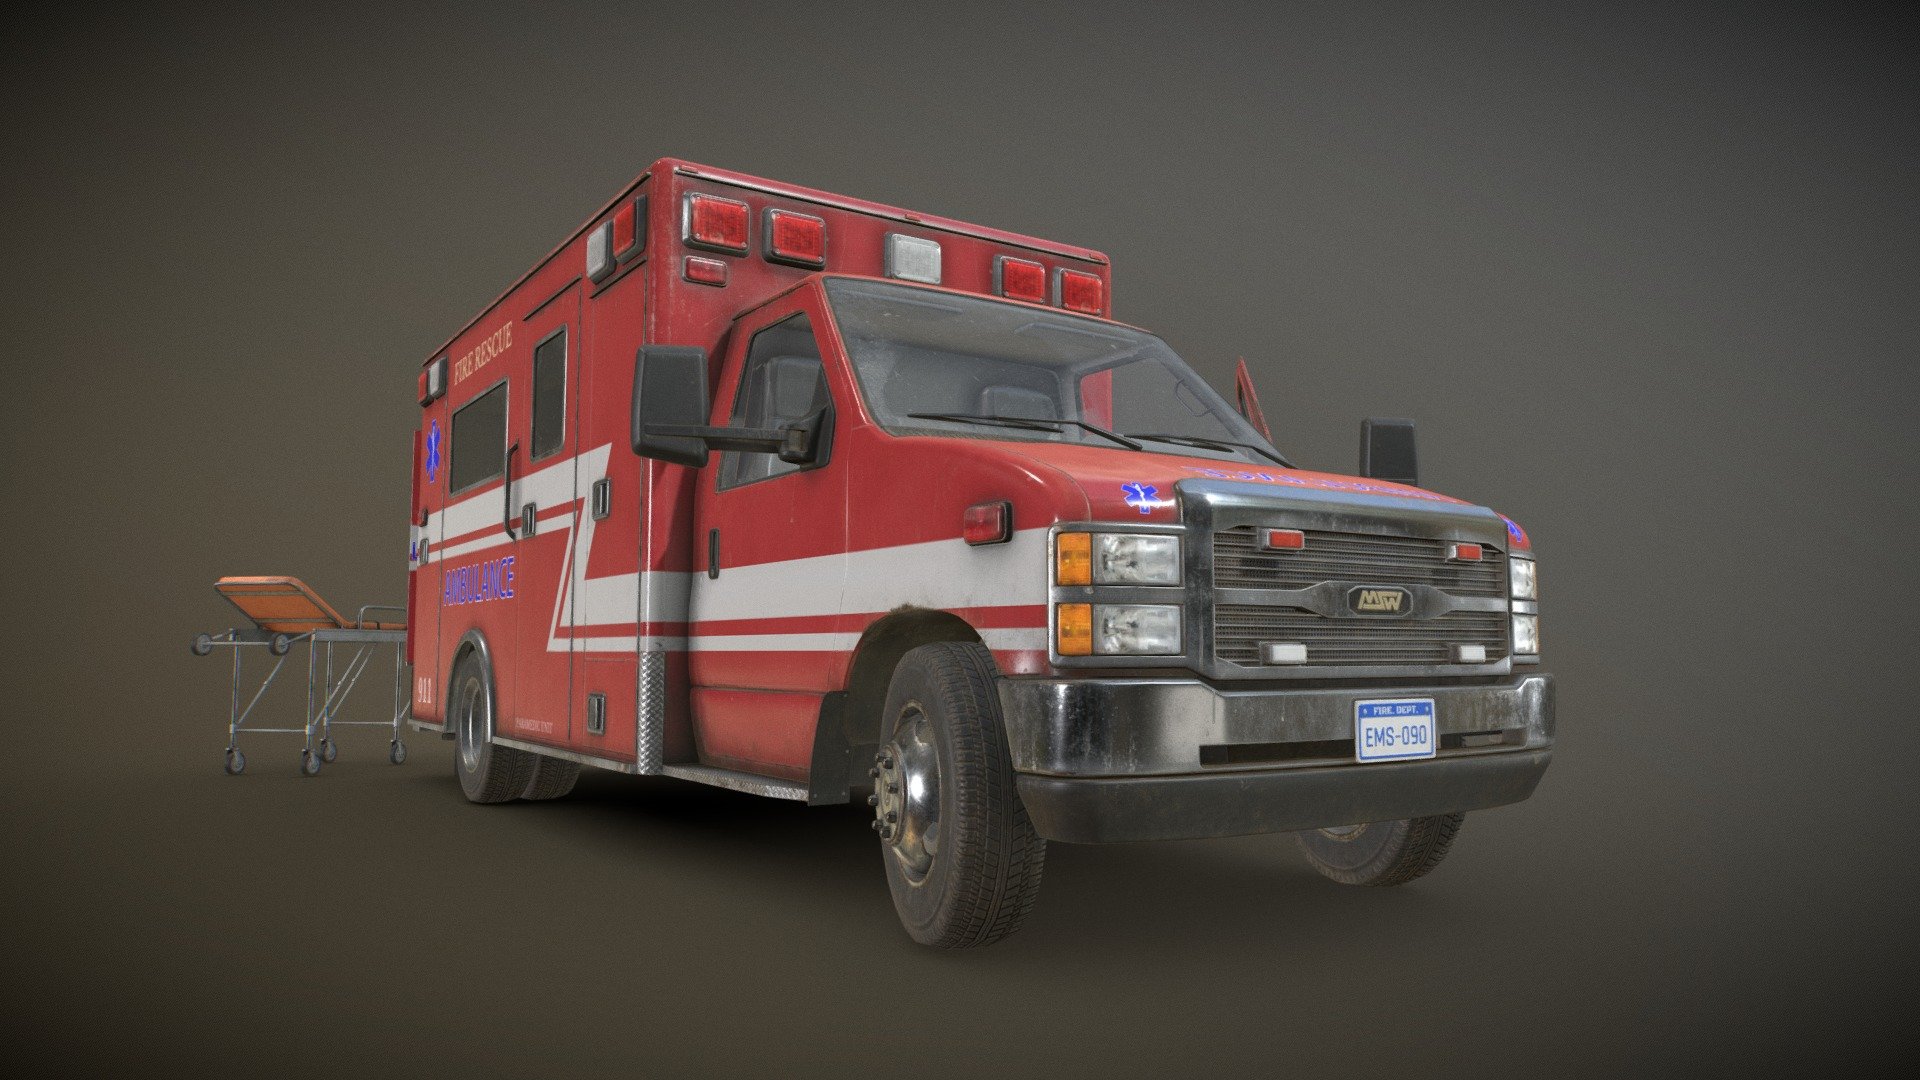 Game Ready Ambulance with finished interior and Stretcher included:


The unit of measurement used is centimeters
Front and back doors, wheels and steering wheel are separated and can be easily rigged/animated.
Interior and Box Interior are separate objects to detach if needed.
Stretcher as separate object and with 2 versions (open and folded)
PBR textures
All branding and labels are custom made
Second uv channel included
Packed ORM textures included
Average texel density: 1040 px/m

Polys:


Ambulance: 31.272 tris
Stretcher: 3.344 tris
TOTAL: 34.616 tris

Maps sizes: 


Body: 4096x4096
Details: 4096x4096
Interior: 4096x4096
Box Interior: 4096x4096
Wheels: 2048x2048
Windows: 2048x2048
Stretcher: 2048x2048

Provided Maps:


Albedo 
Normal
Roughness
Metalness
AO
Opacity included in Albedo (windows)
Emissive

Formats Incuded - MAX / BLEND / OBJ / FBX 

This model can be used for any game, film, personal project, etc. You may not resell or redistribute - Ambulance Type 2 - Low Poly - Buy Royalty Free 3D model by MSWoodvine 3d model